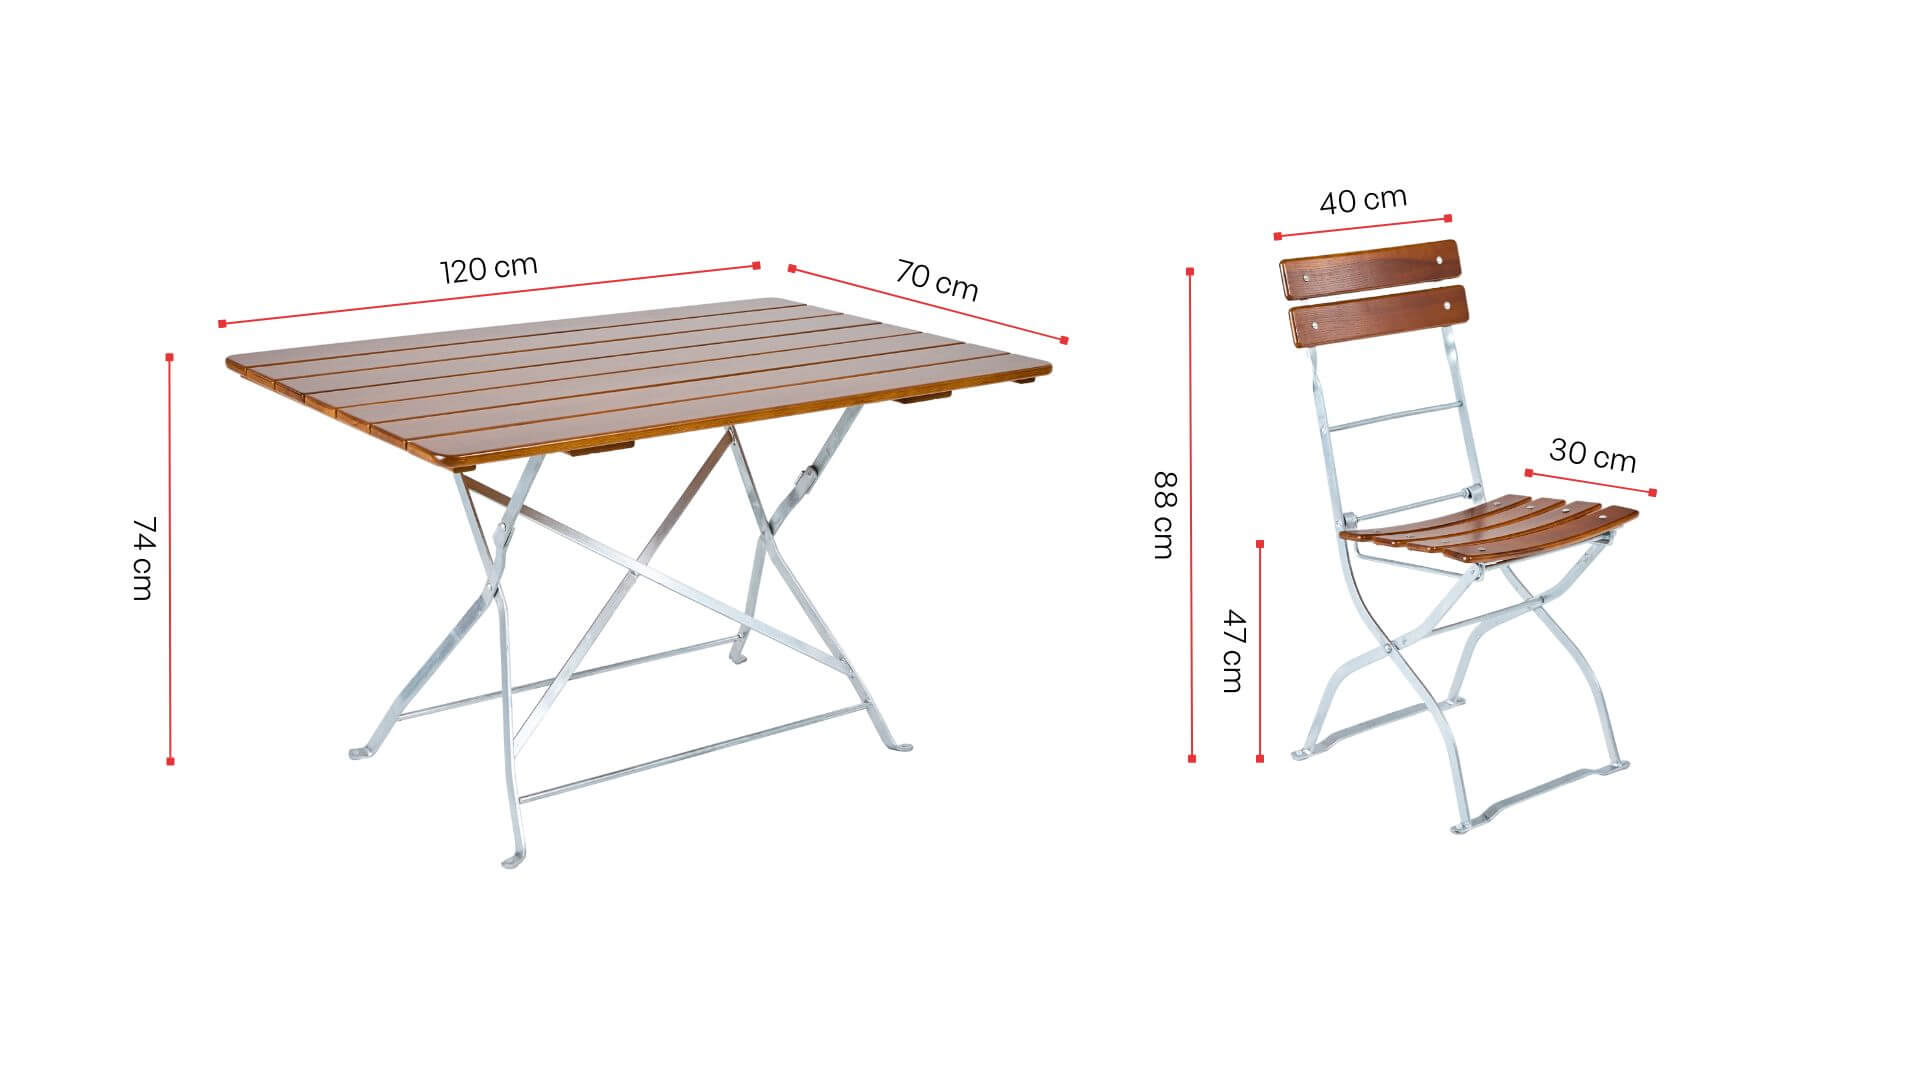 The dimensions of the rectangular beer garden table and beer garden chair are shown.